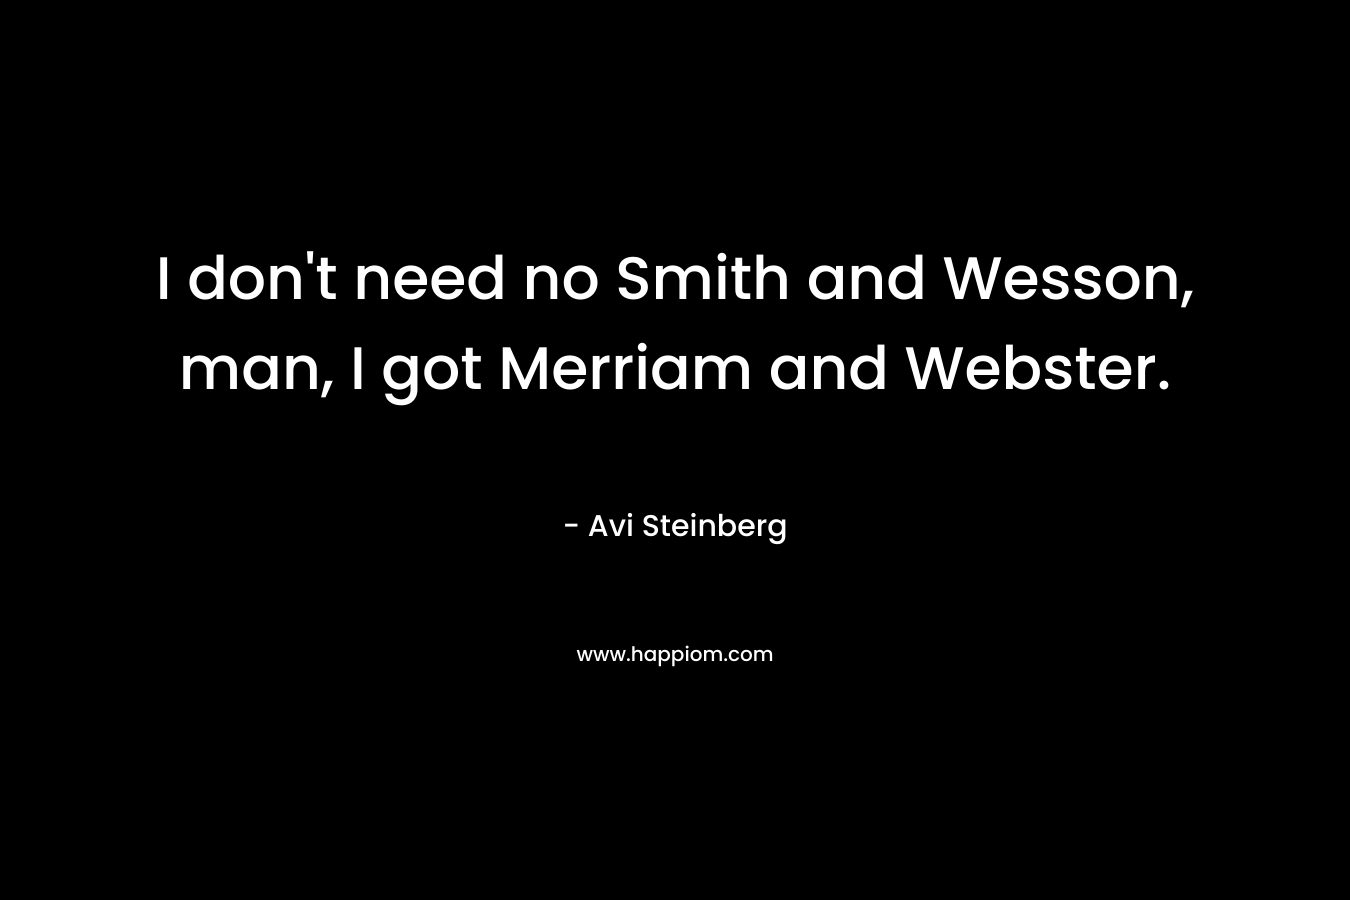 I don’t need no Smith and Wesson, man, I got Merriam and Webster. – Avi Steinberg